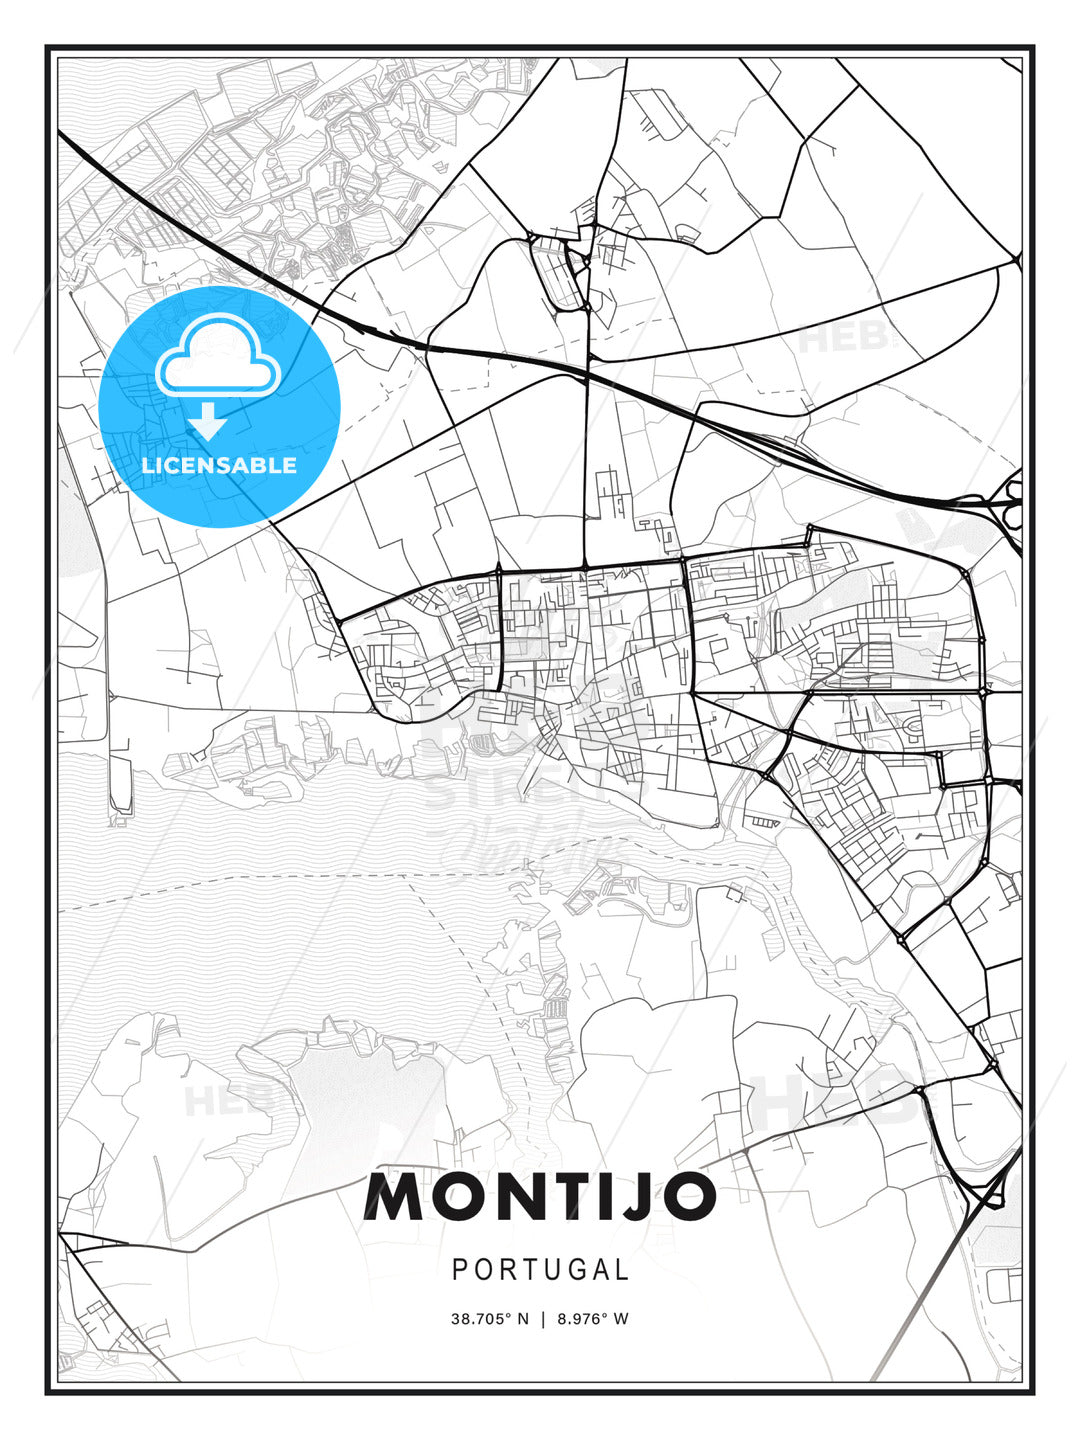 Montijo, Portugal, Modern Print Template in Various Formats - HEBSTREITS Sketches